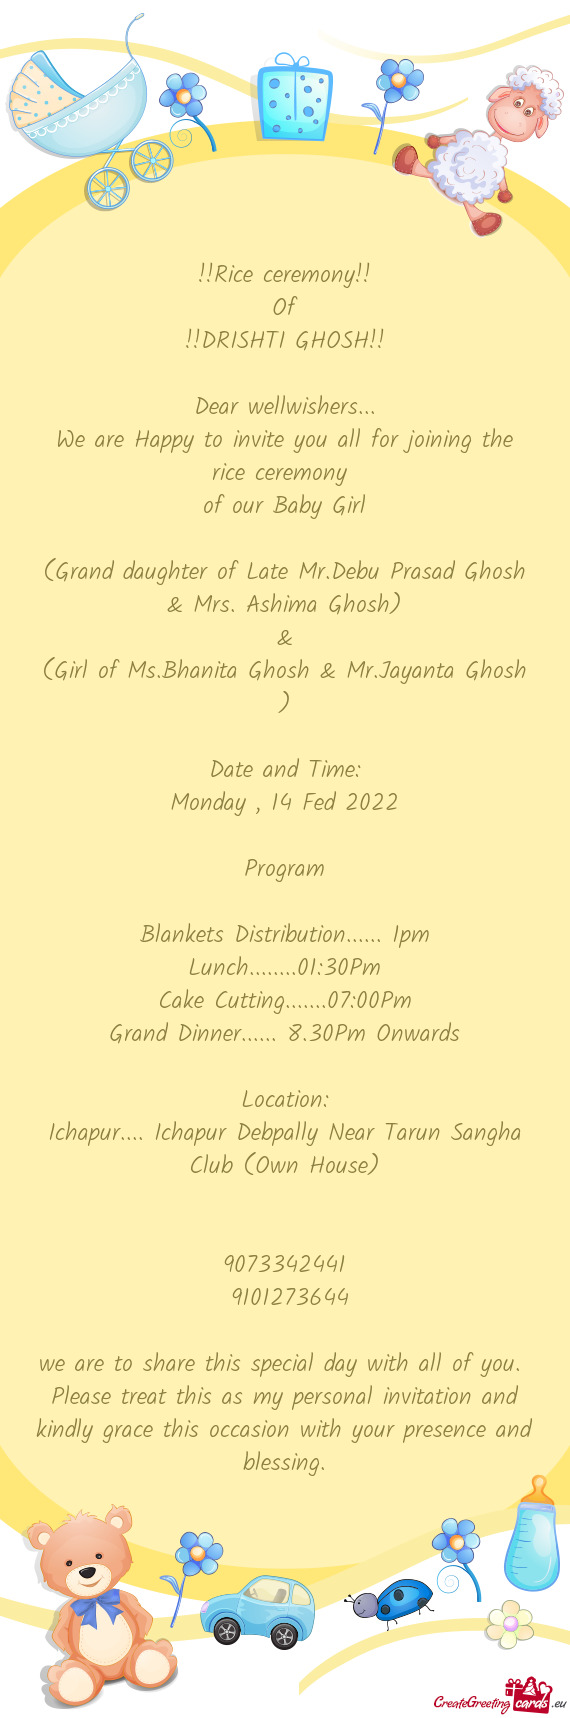 We are Happy to invite you all for joining the rice ceremony